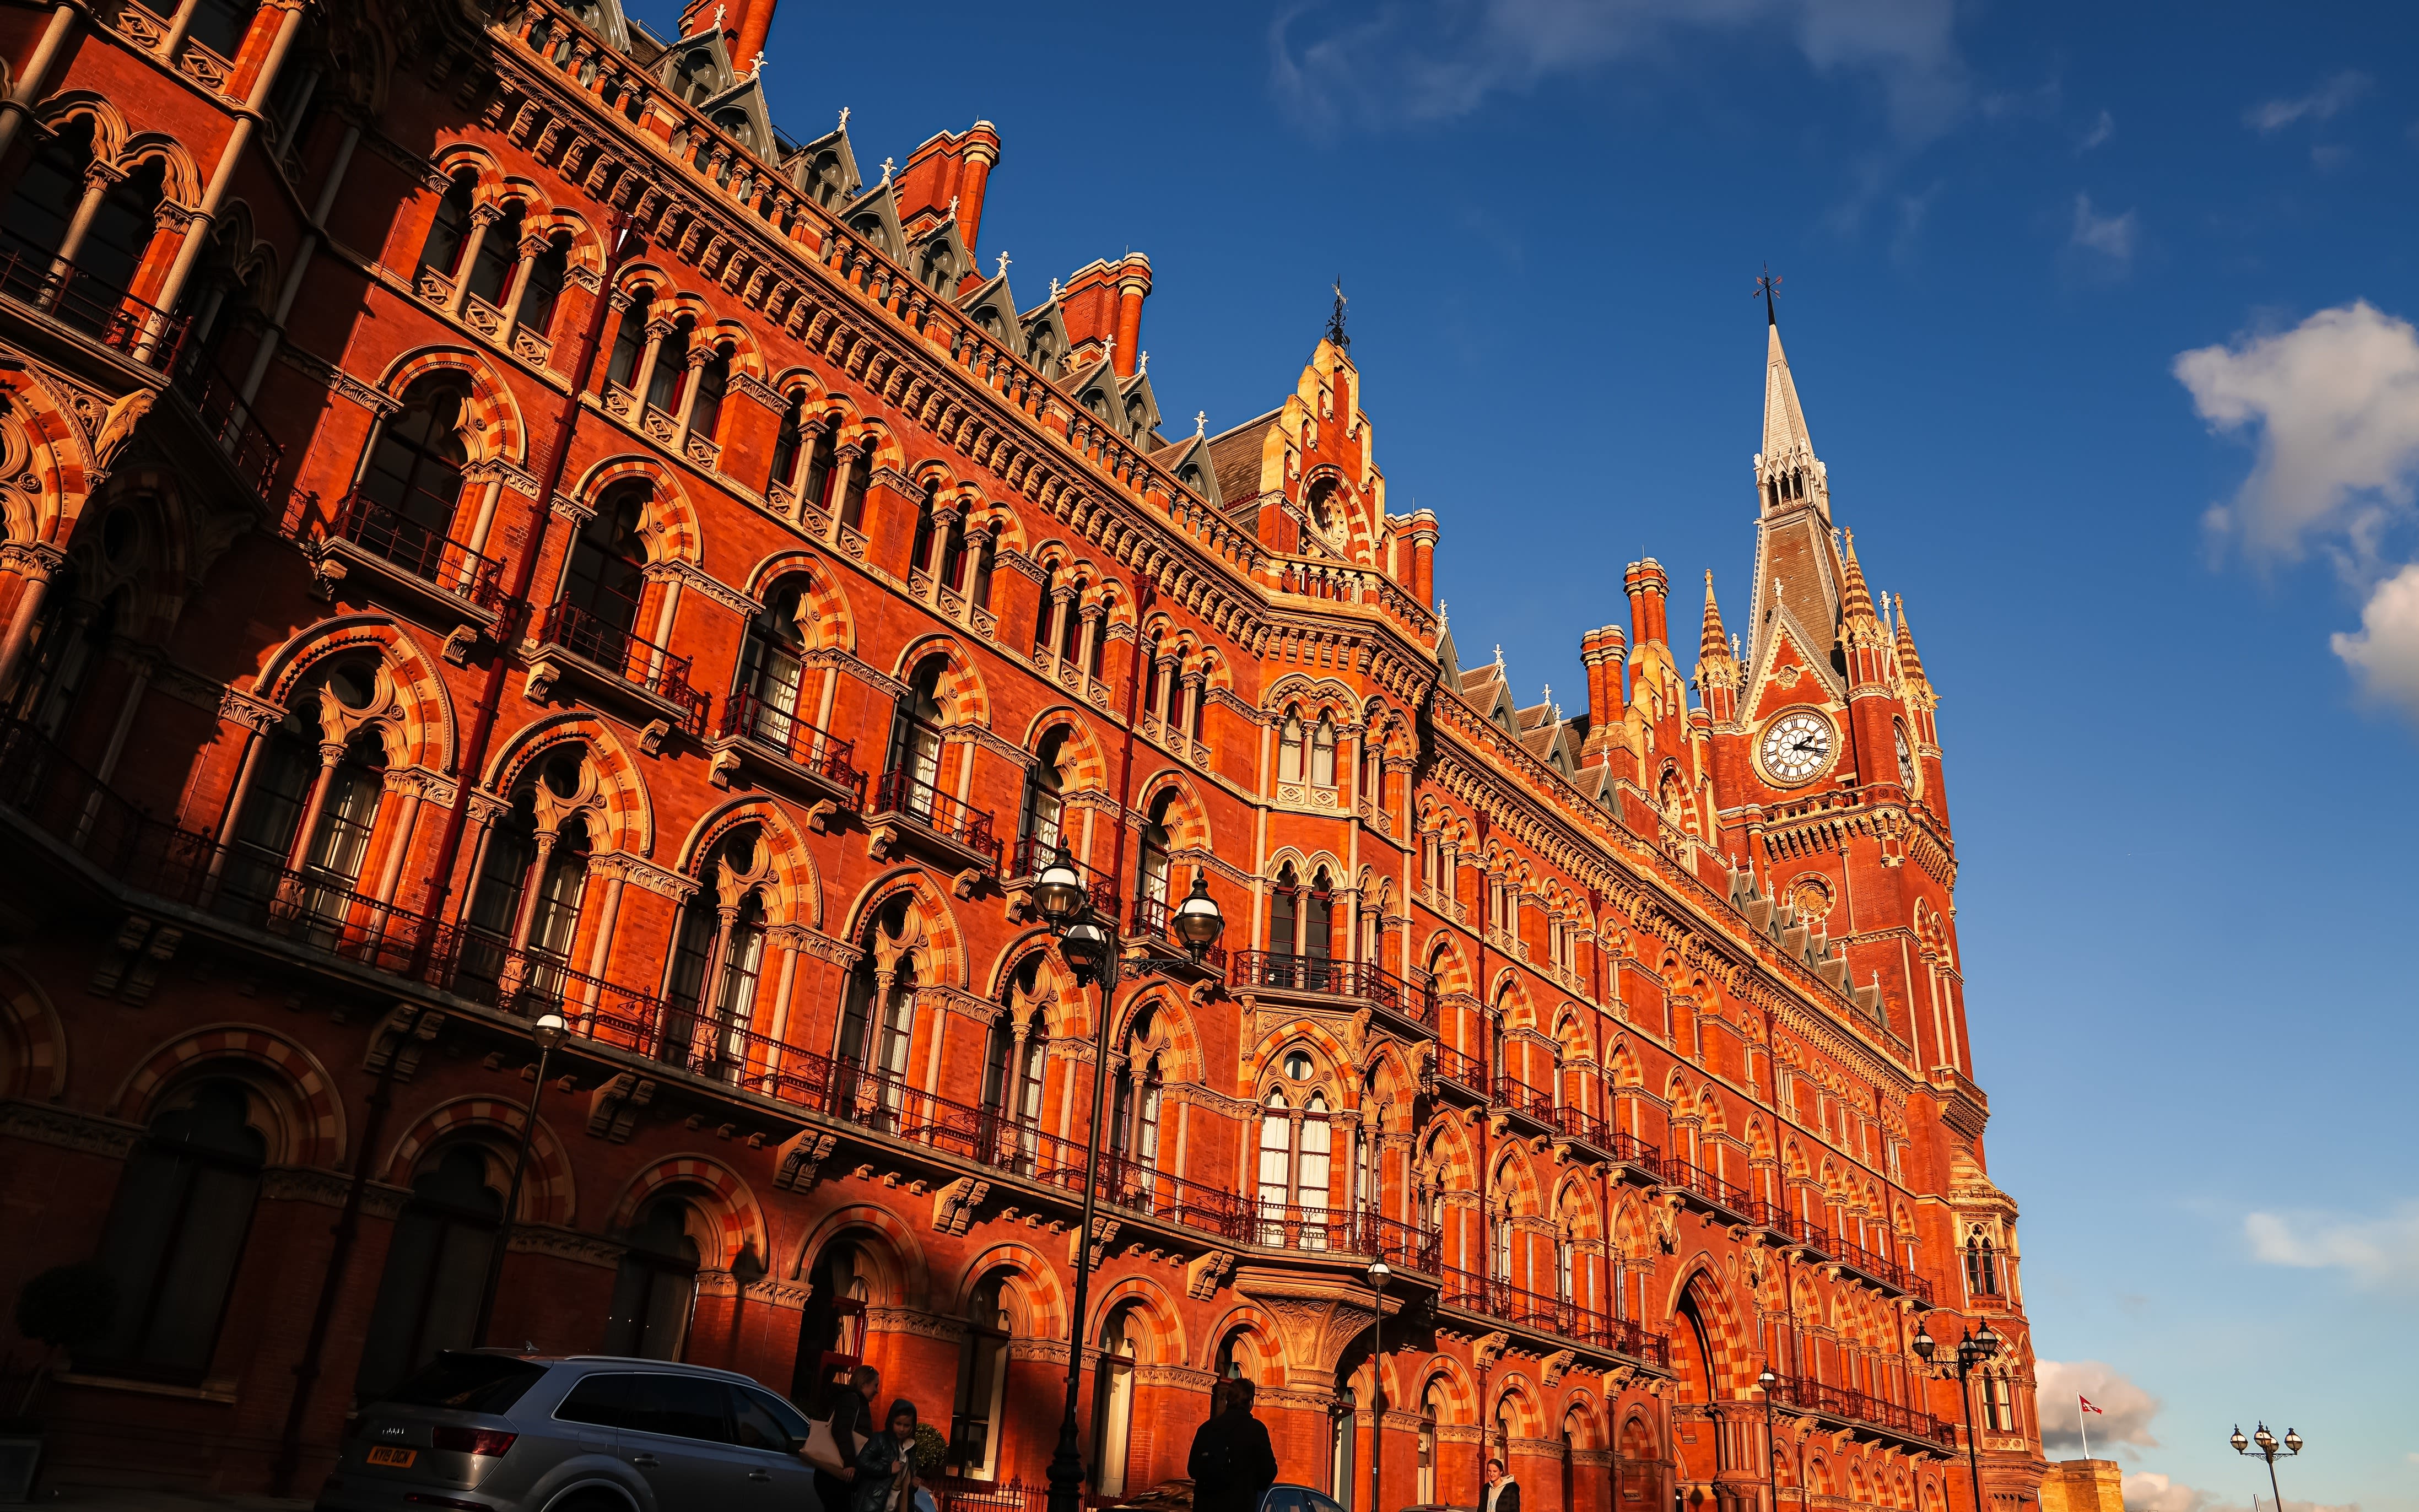 An exterior image of St Pancras station in London